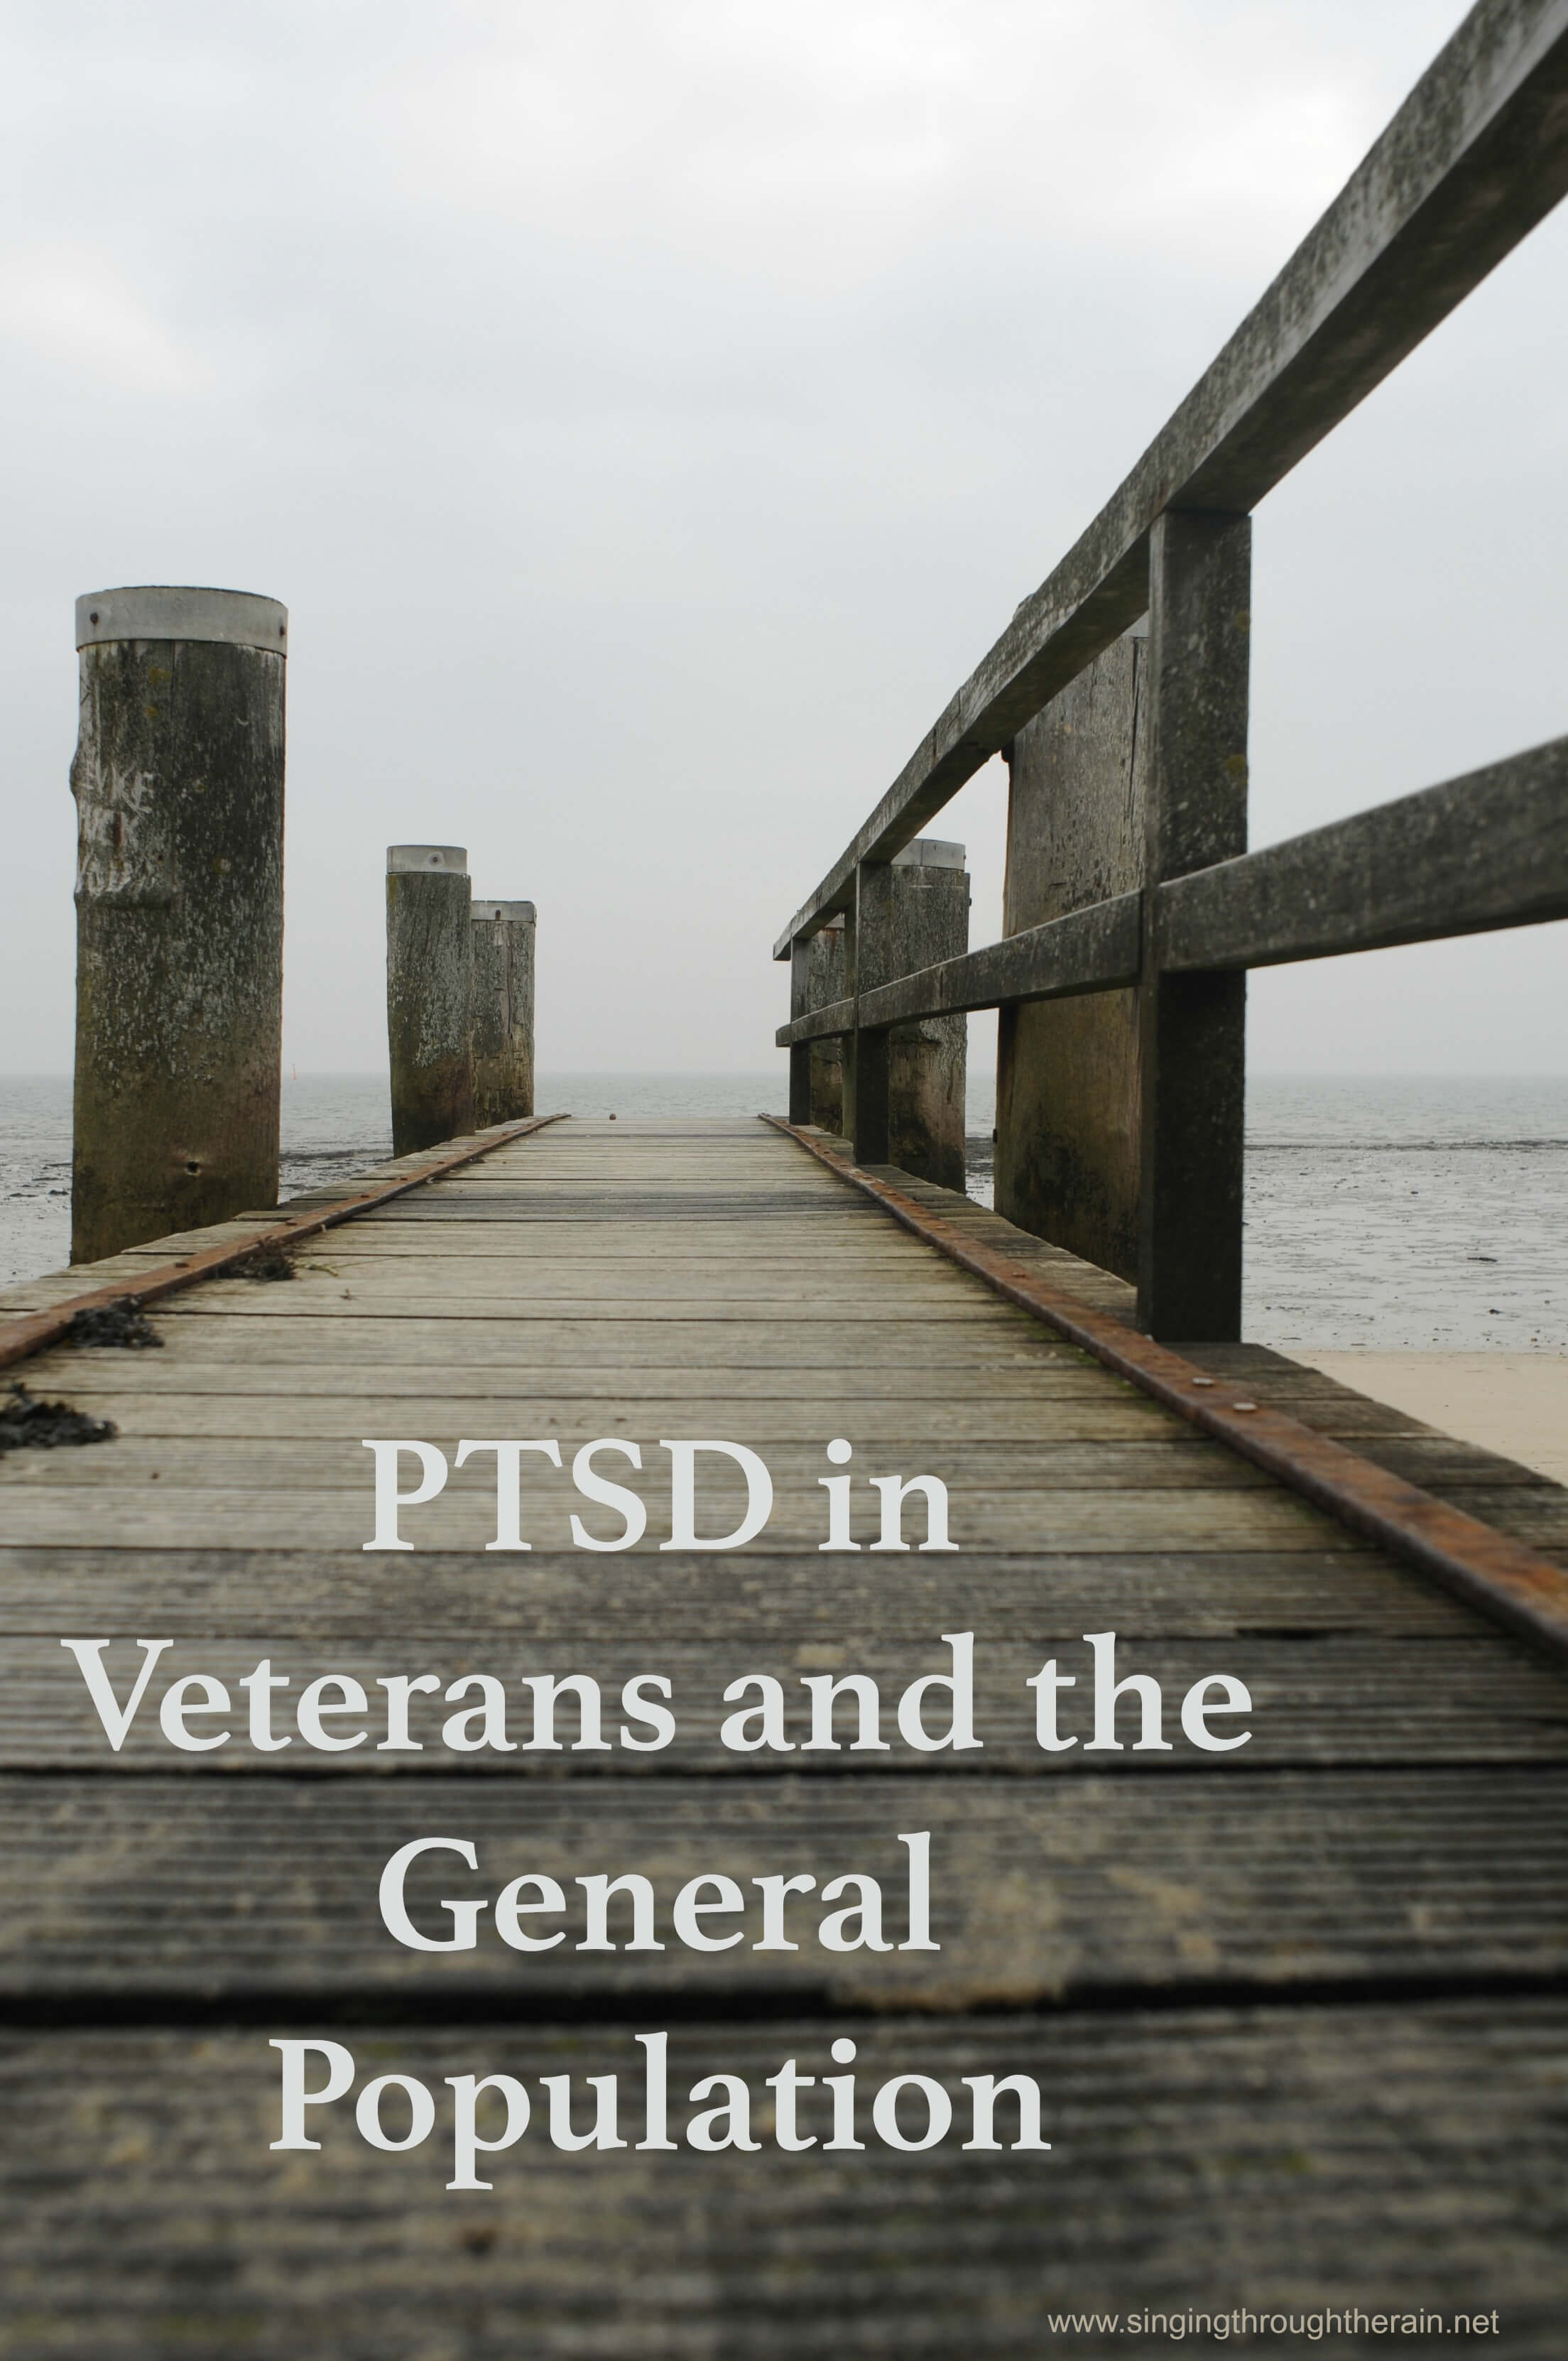 PTSD in Veterans and the General Population